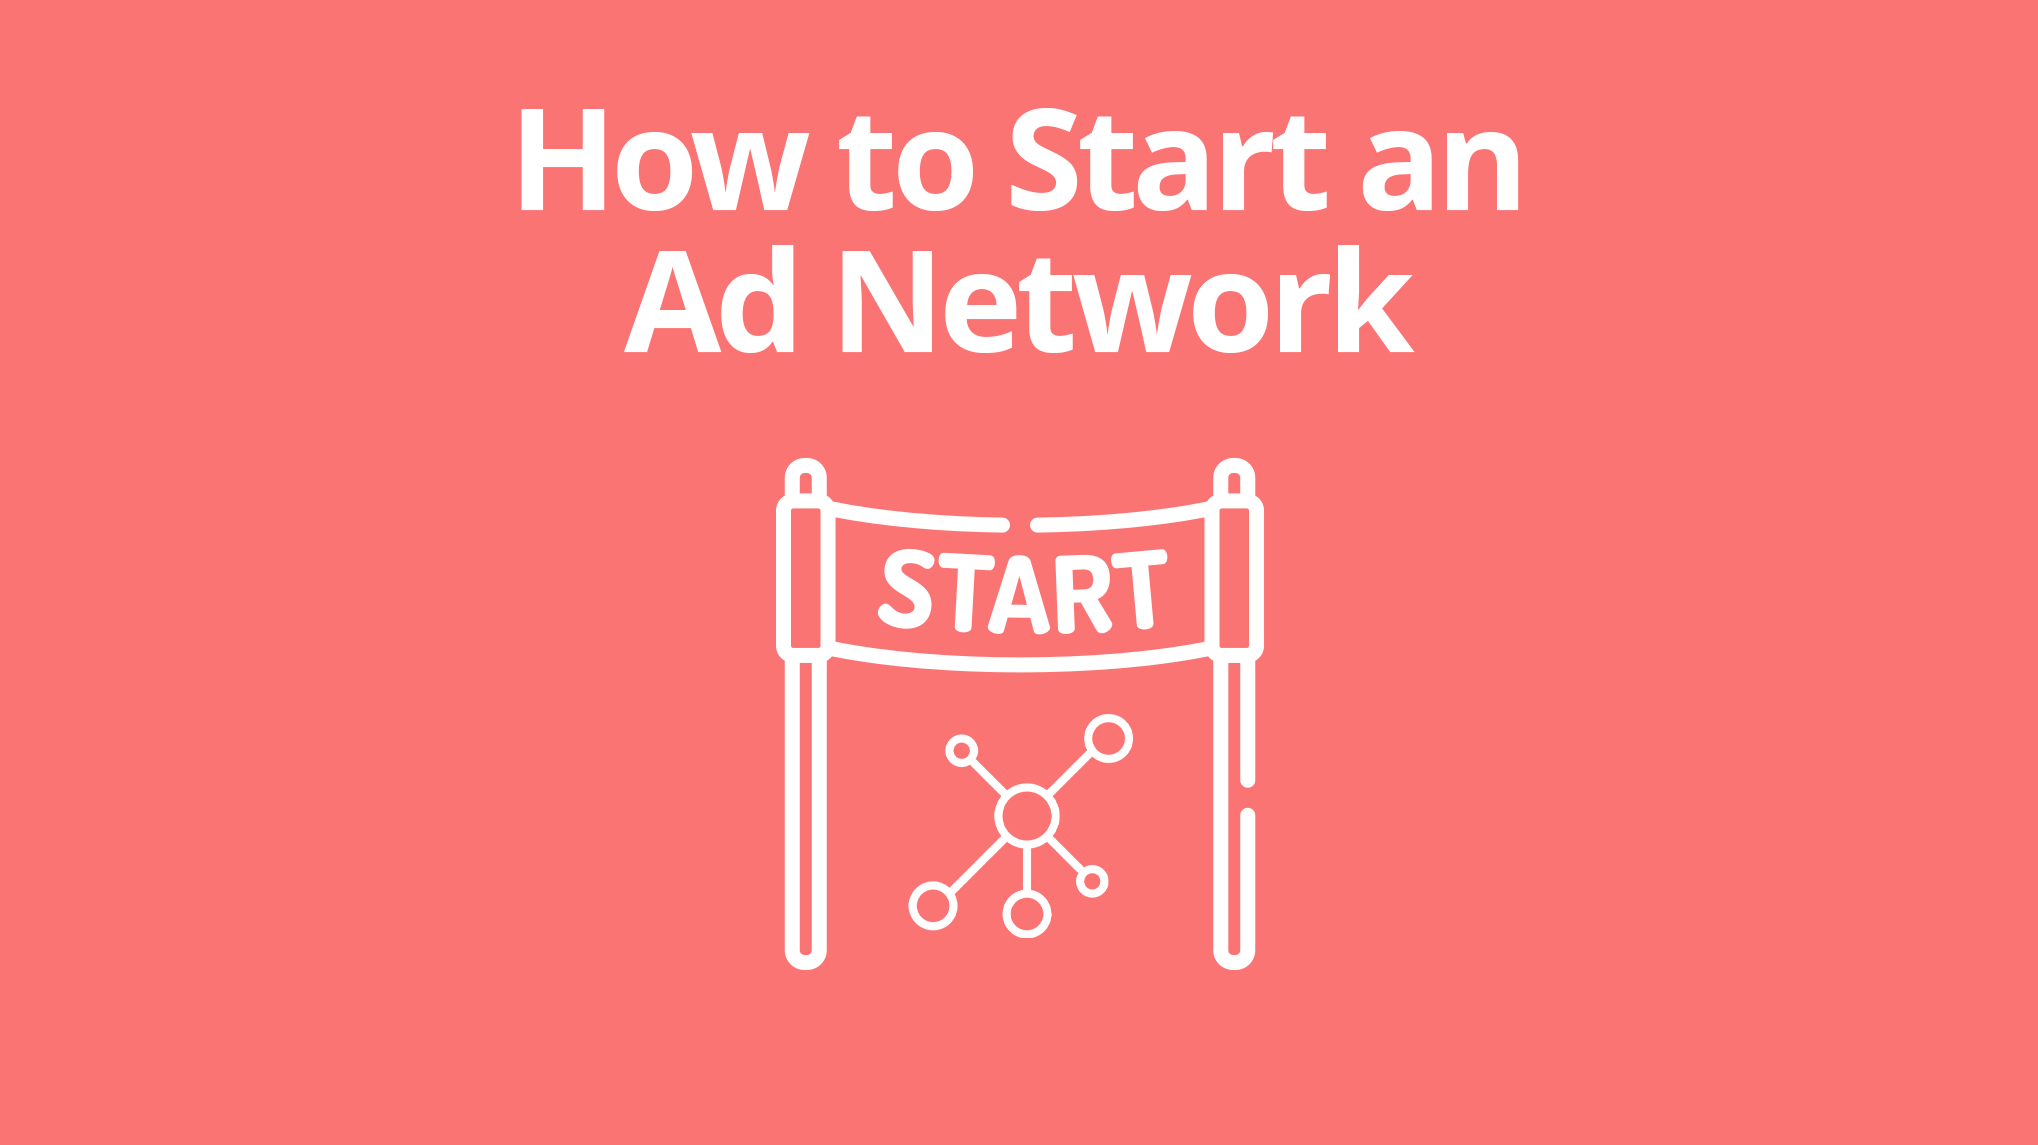 How to Start an Ad Network